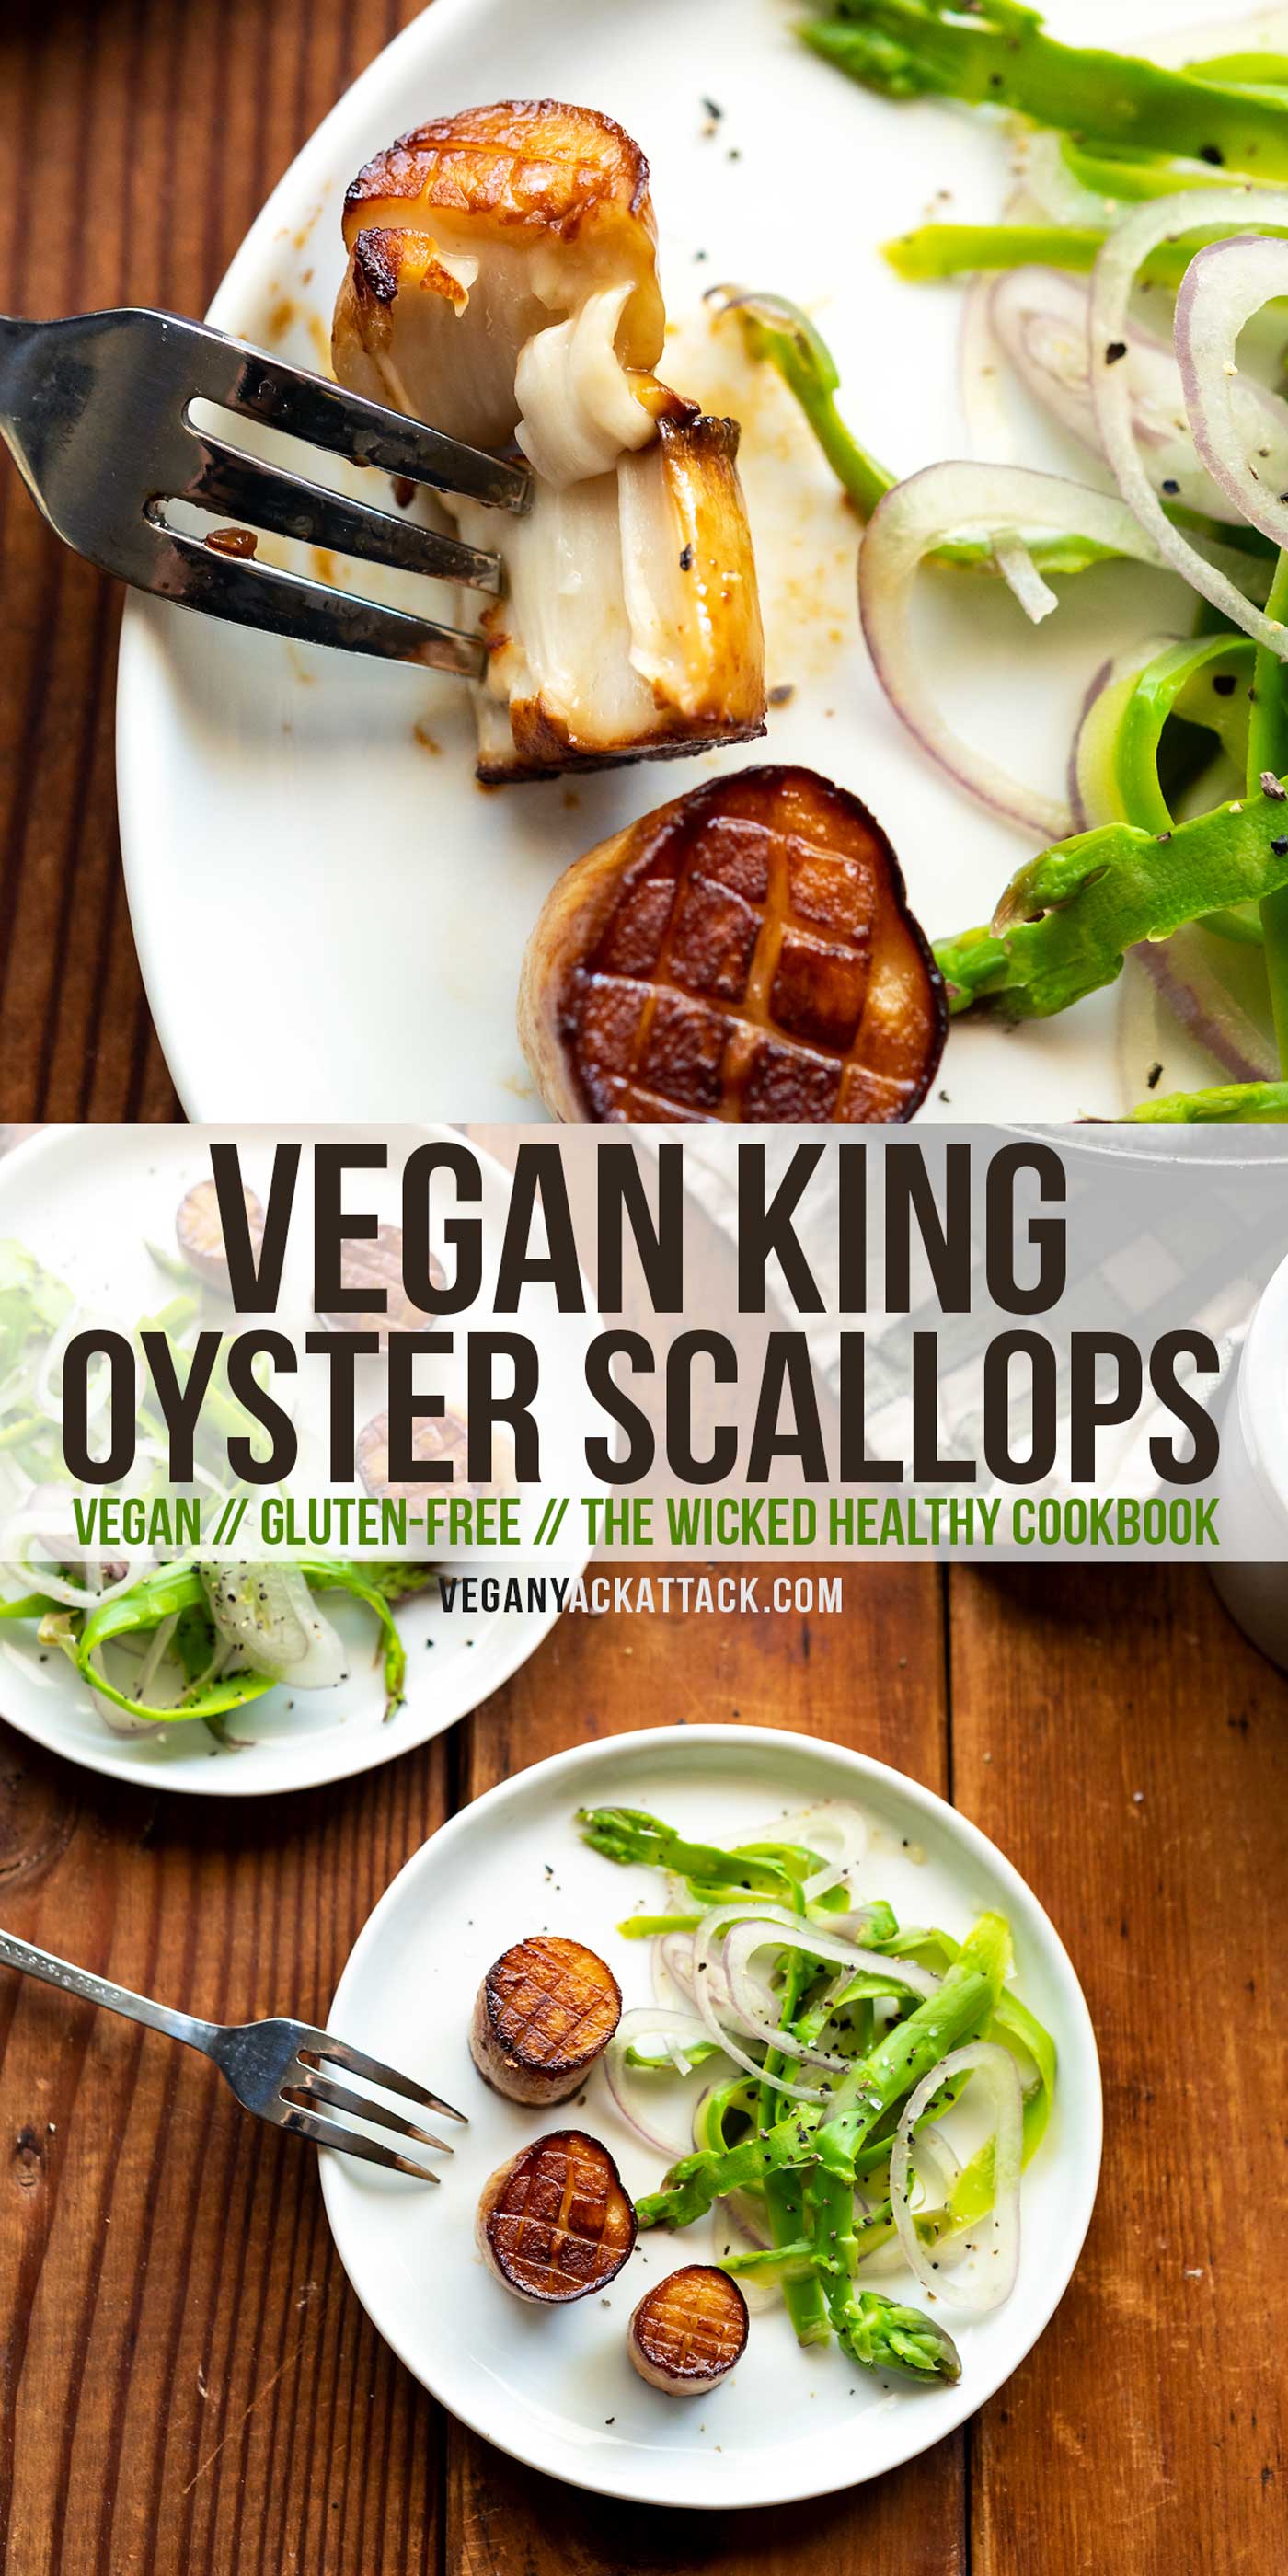 Incredible, vegan, King Oyster Scallops, made from King Oyster Mushrooms! Recipe from The Wicked Healthy Cookbook, and makes for an impressive appetizer.